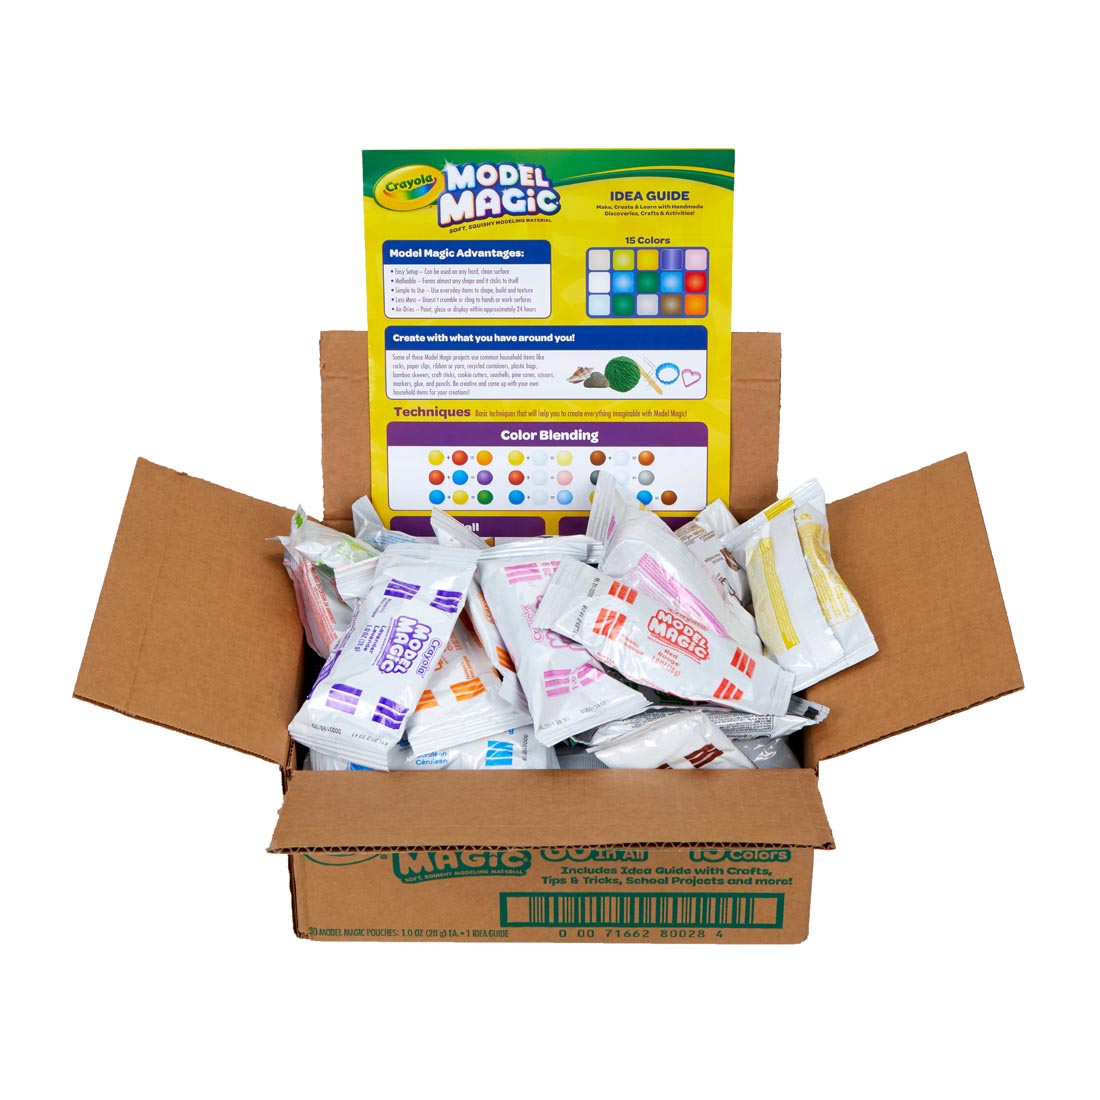 Crayola Model Magic Variety Pack, showing idea guide and several pouches of model